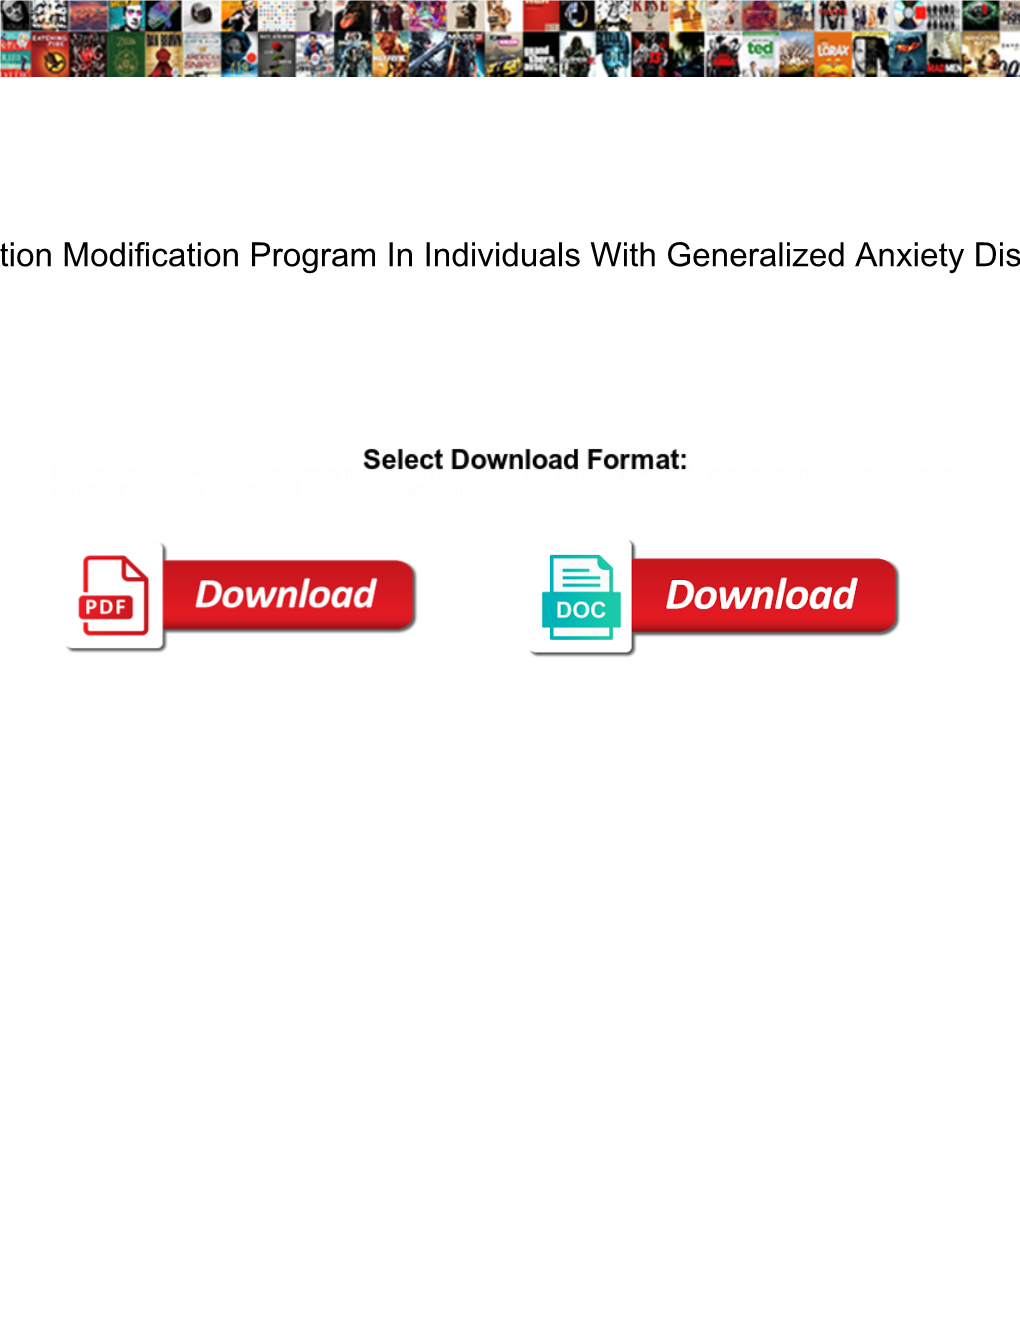 Attention Modification Program in Individuals with Generalized Anxiety Disorder